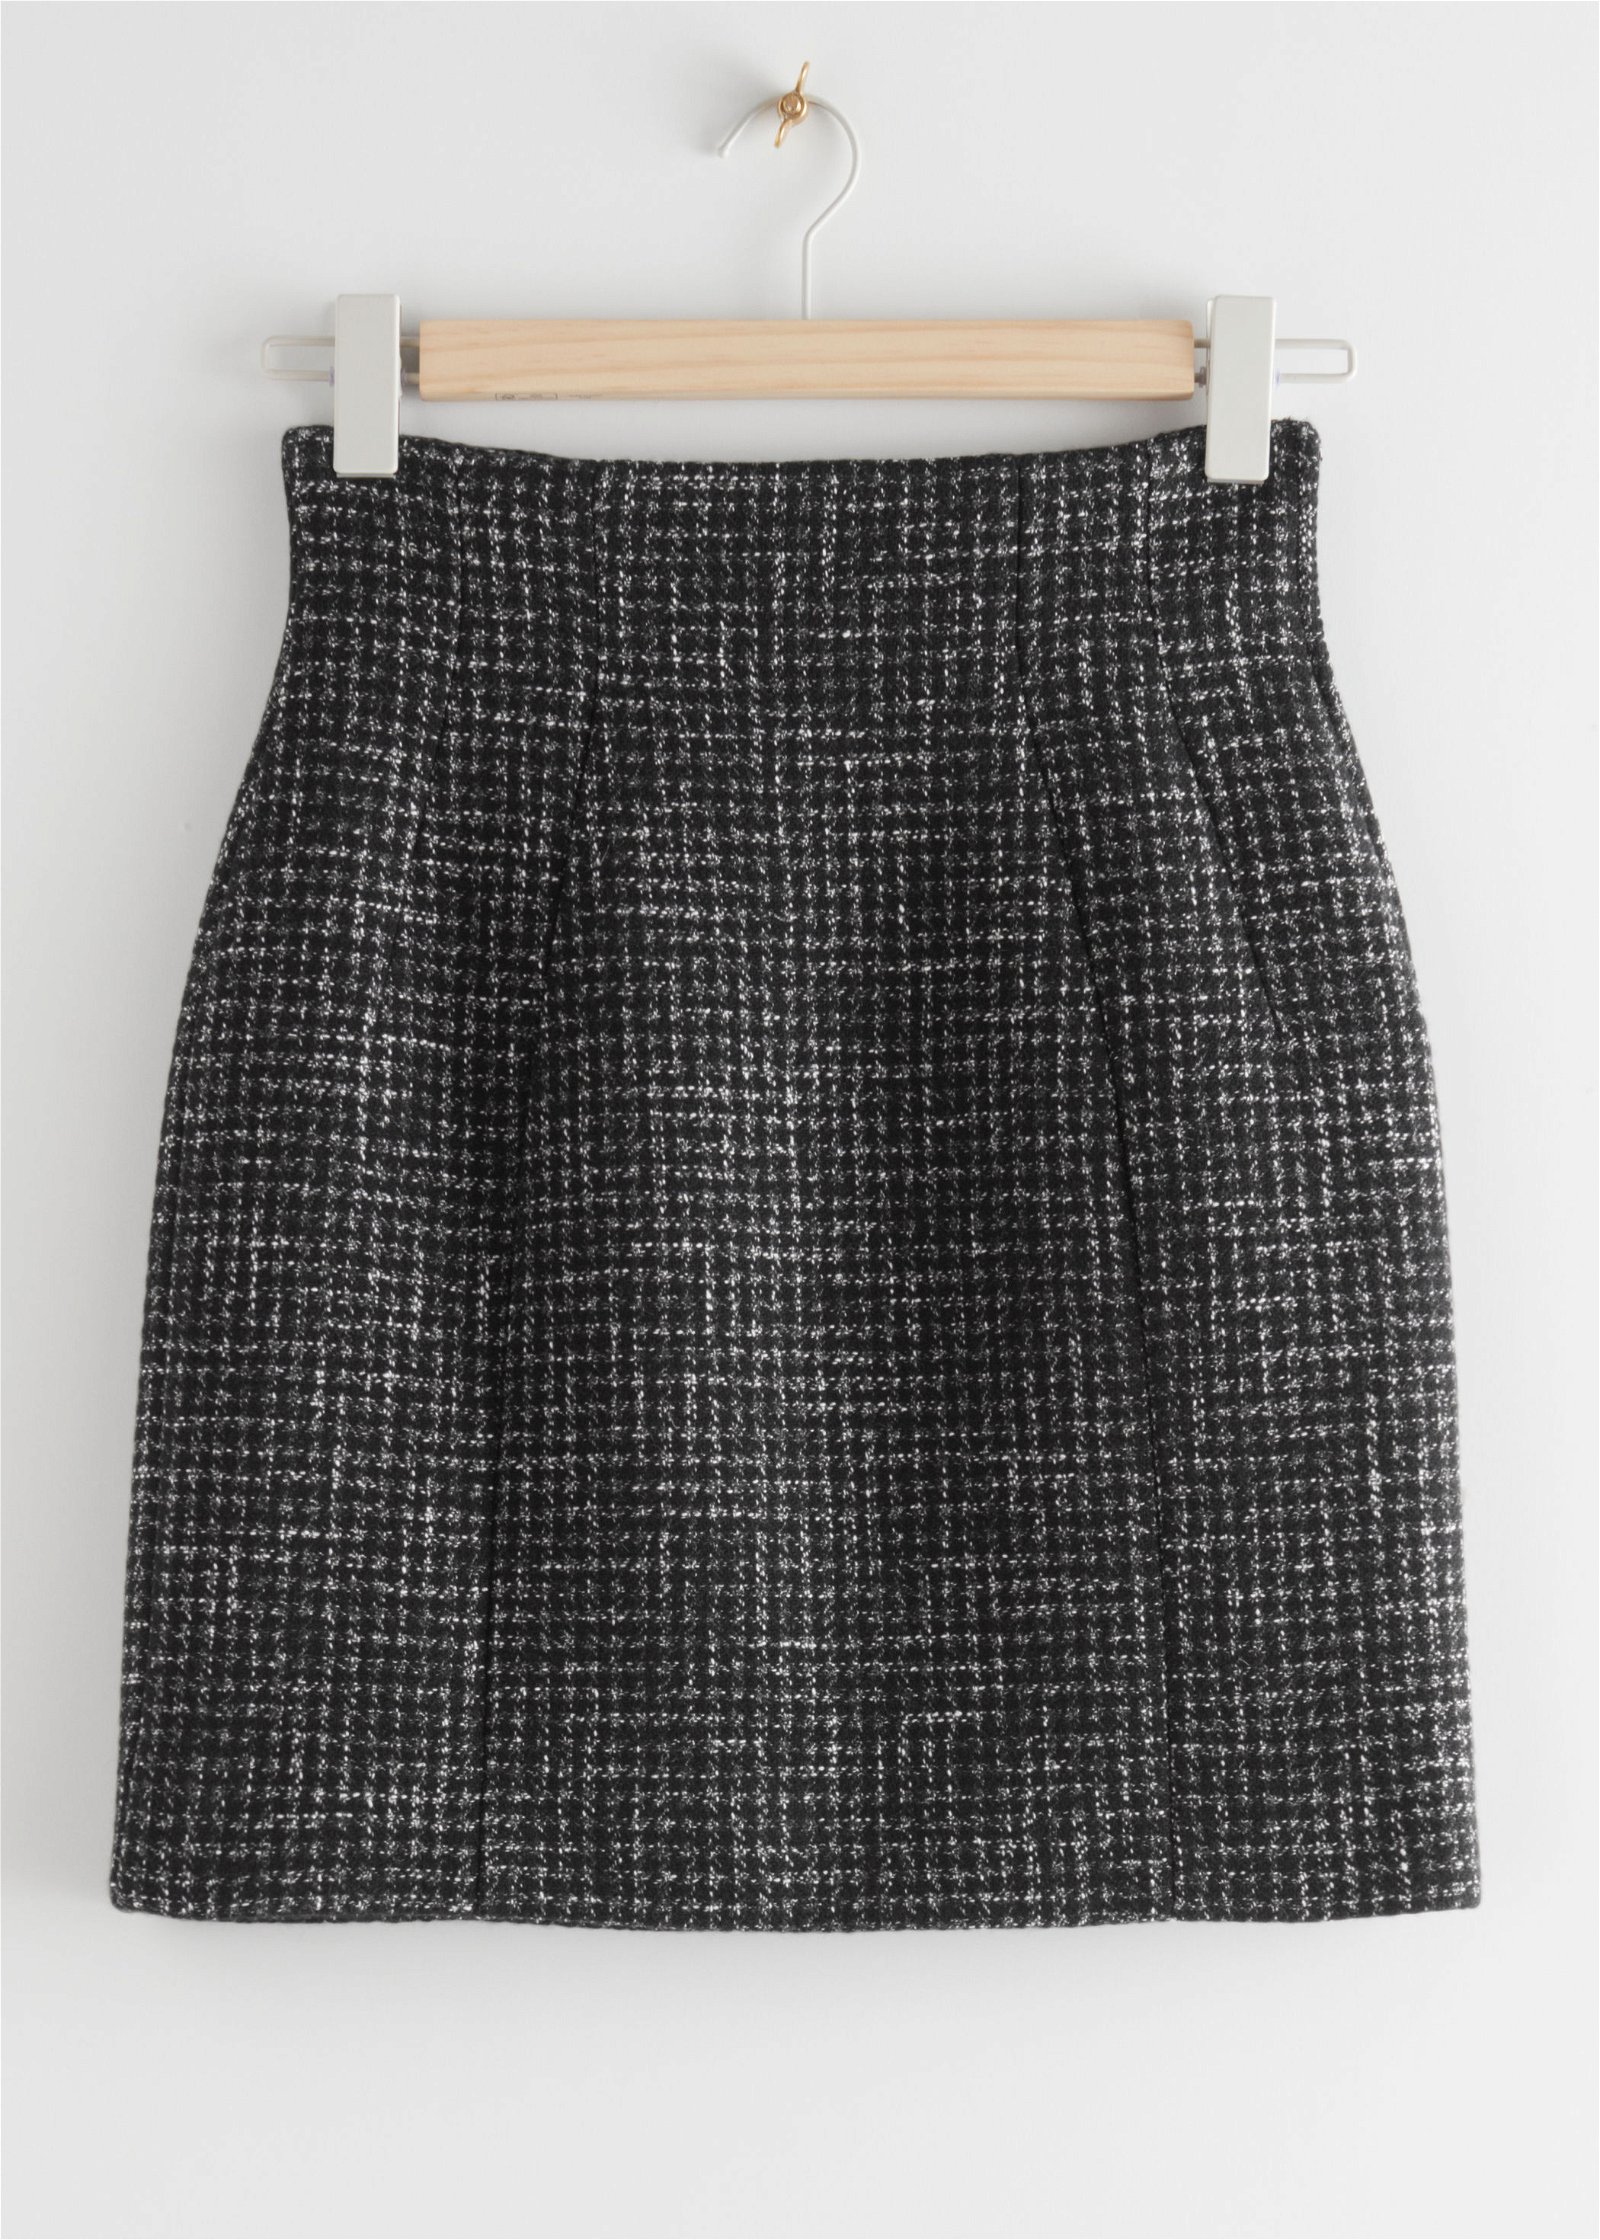  Other Stories wool blend low rise mini skirt in salt and pepper gray -  part of a set